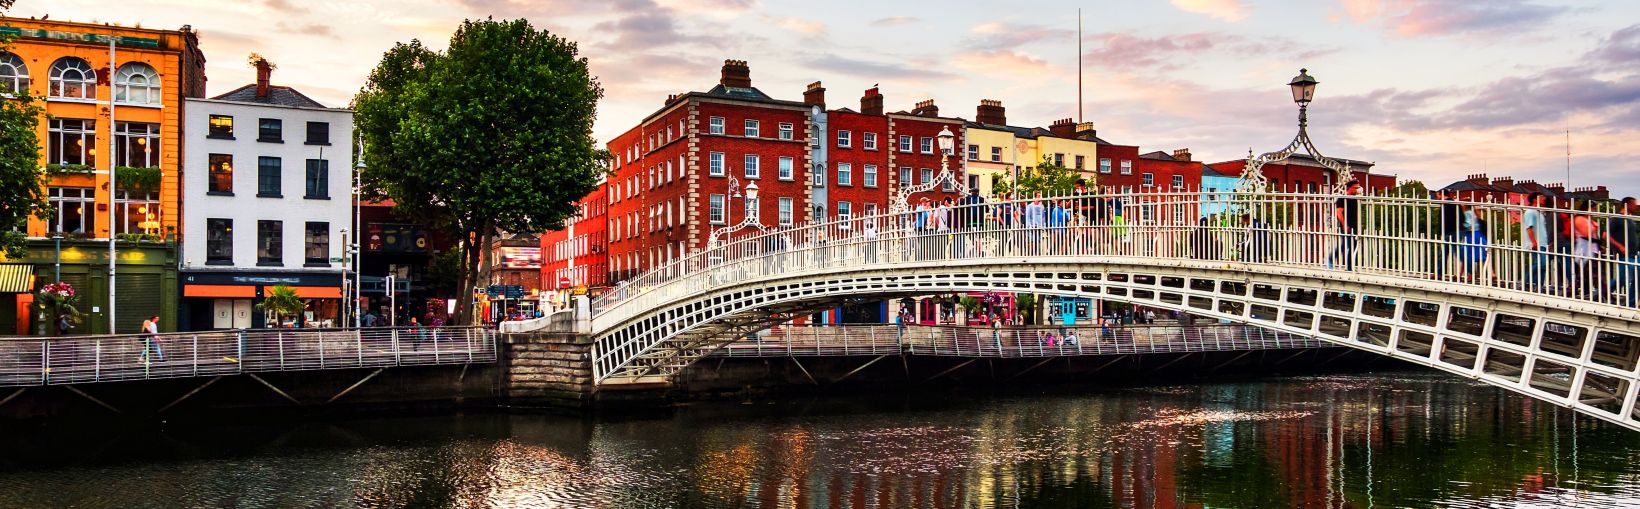 Stena Line Special Offers – Day Trip to Dublin from only £12 return